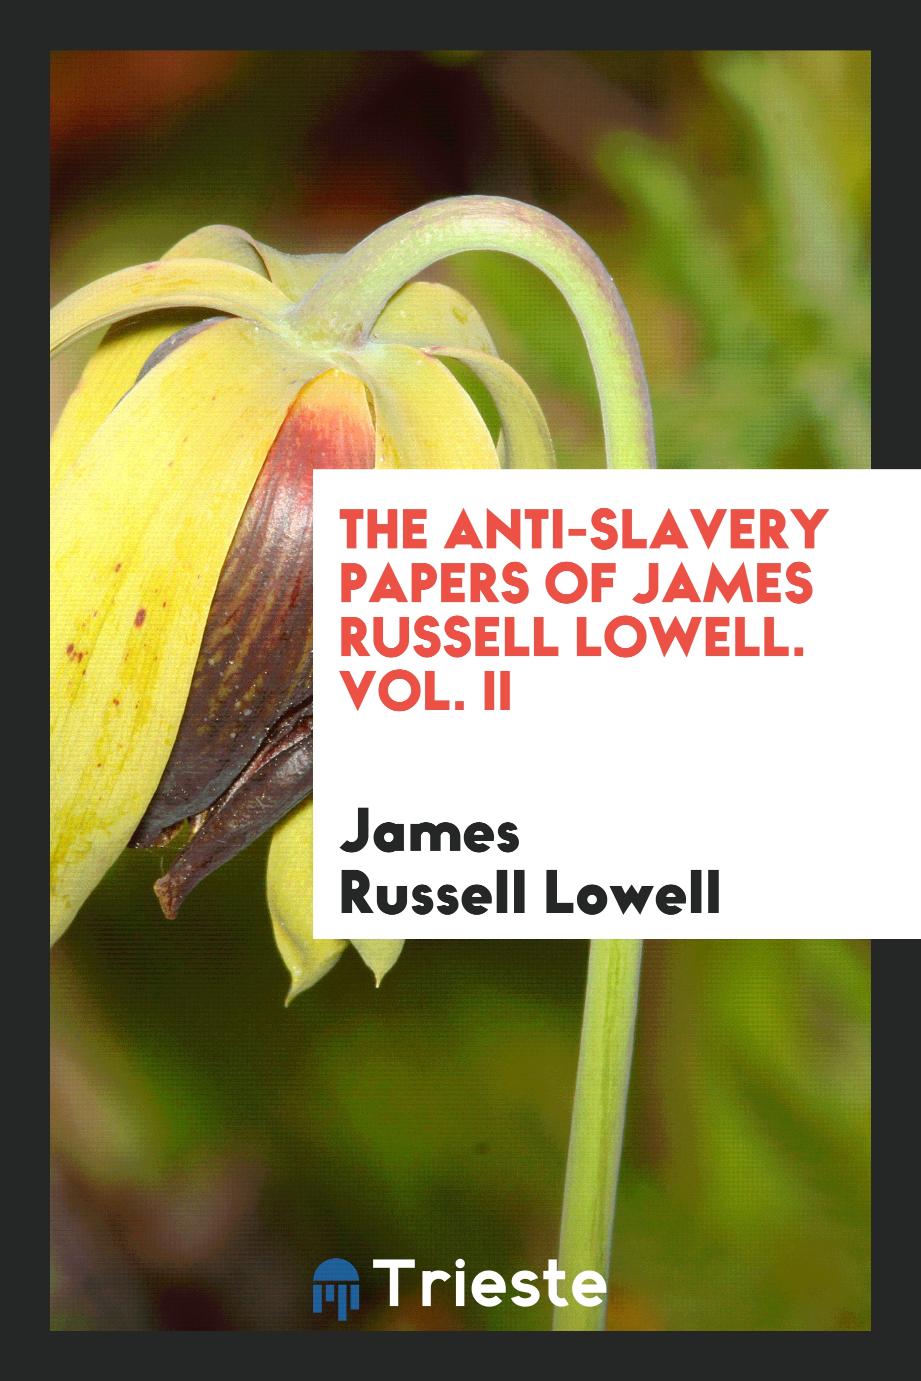 The anti-slavery papers of James Russell Lowell. Vol. II